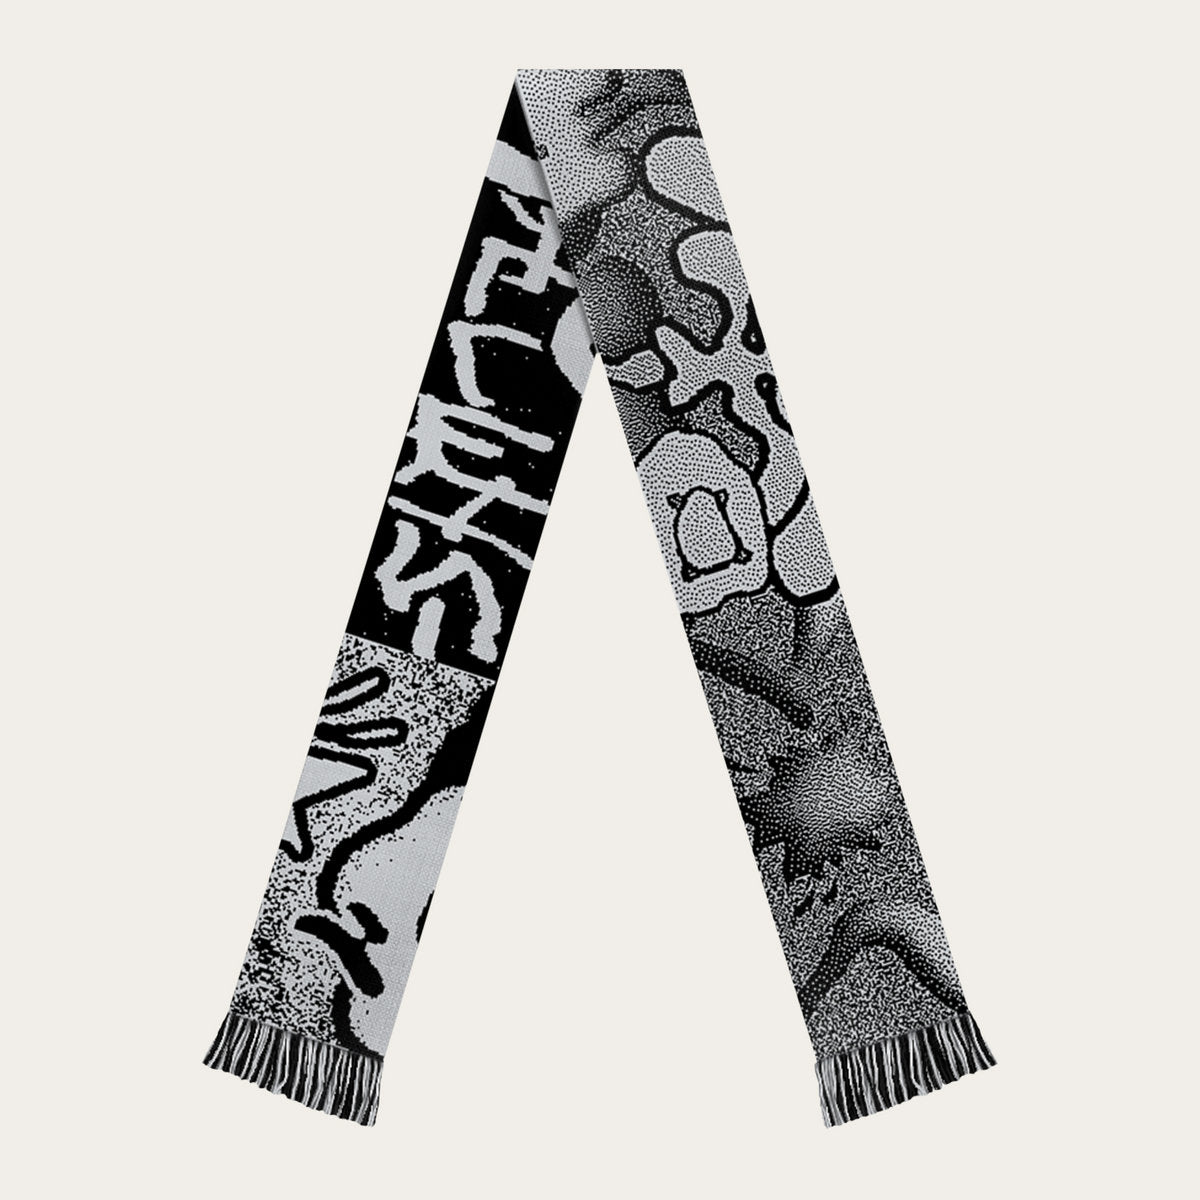 Stewart Armstrong & Maholo "Bleeps & Bloops" / Scarf